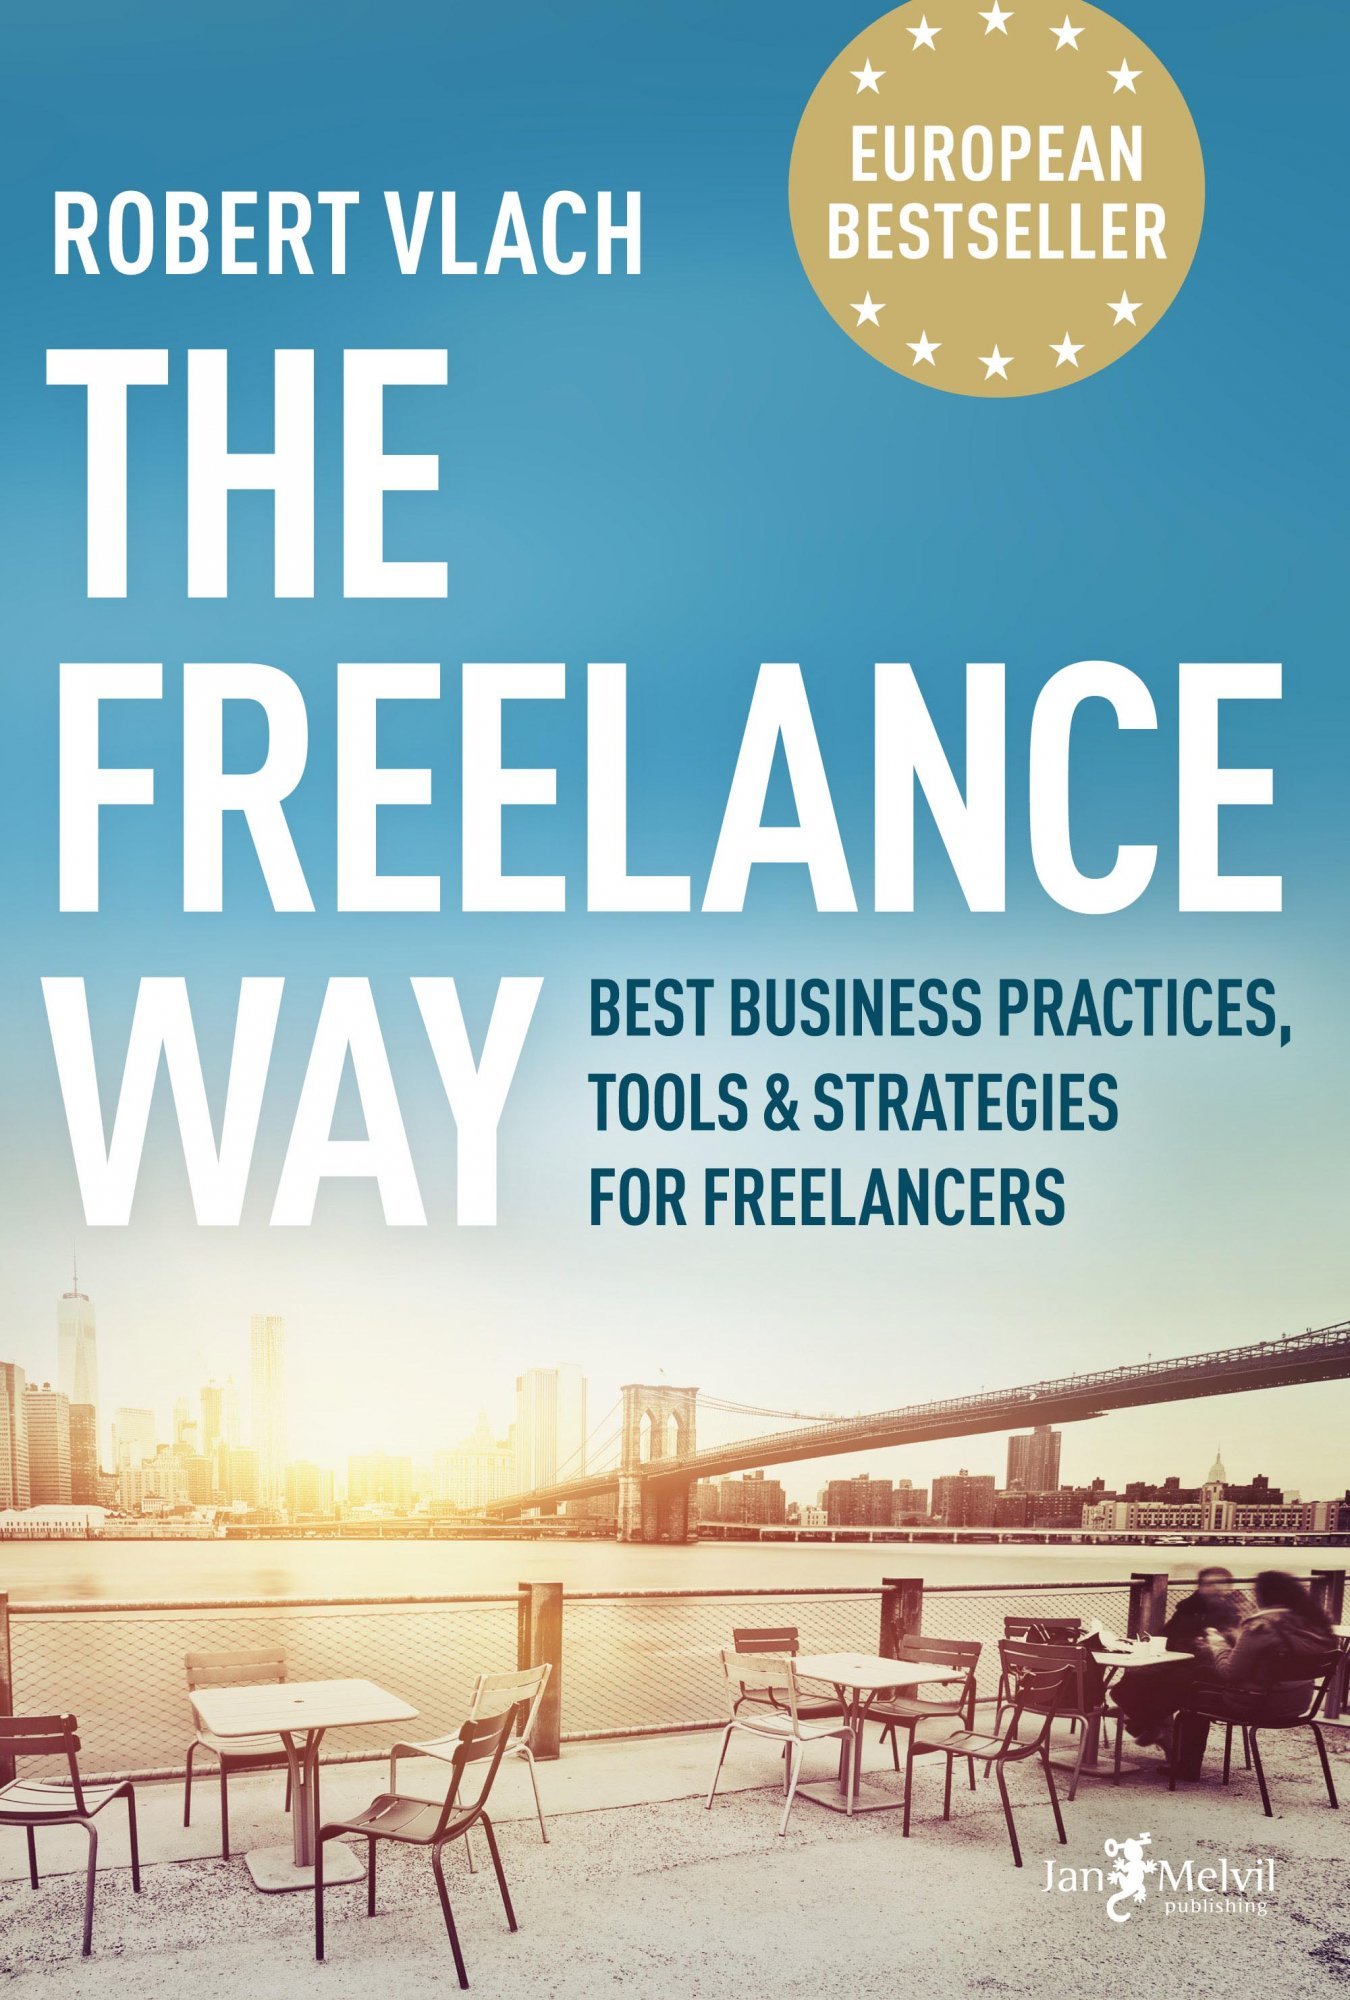 The Freelance Way (Best Business Practices, Tools &amp; Strategies for Freelancers) - Robert Vlach